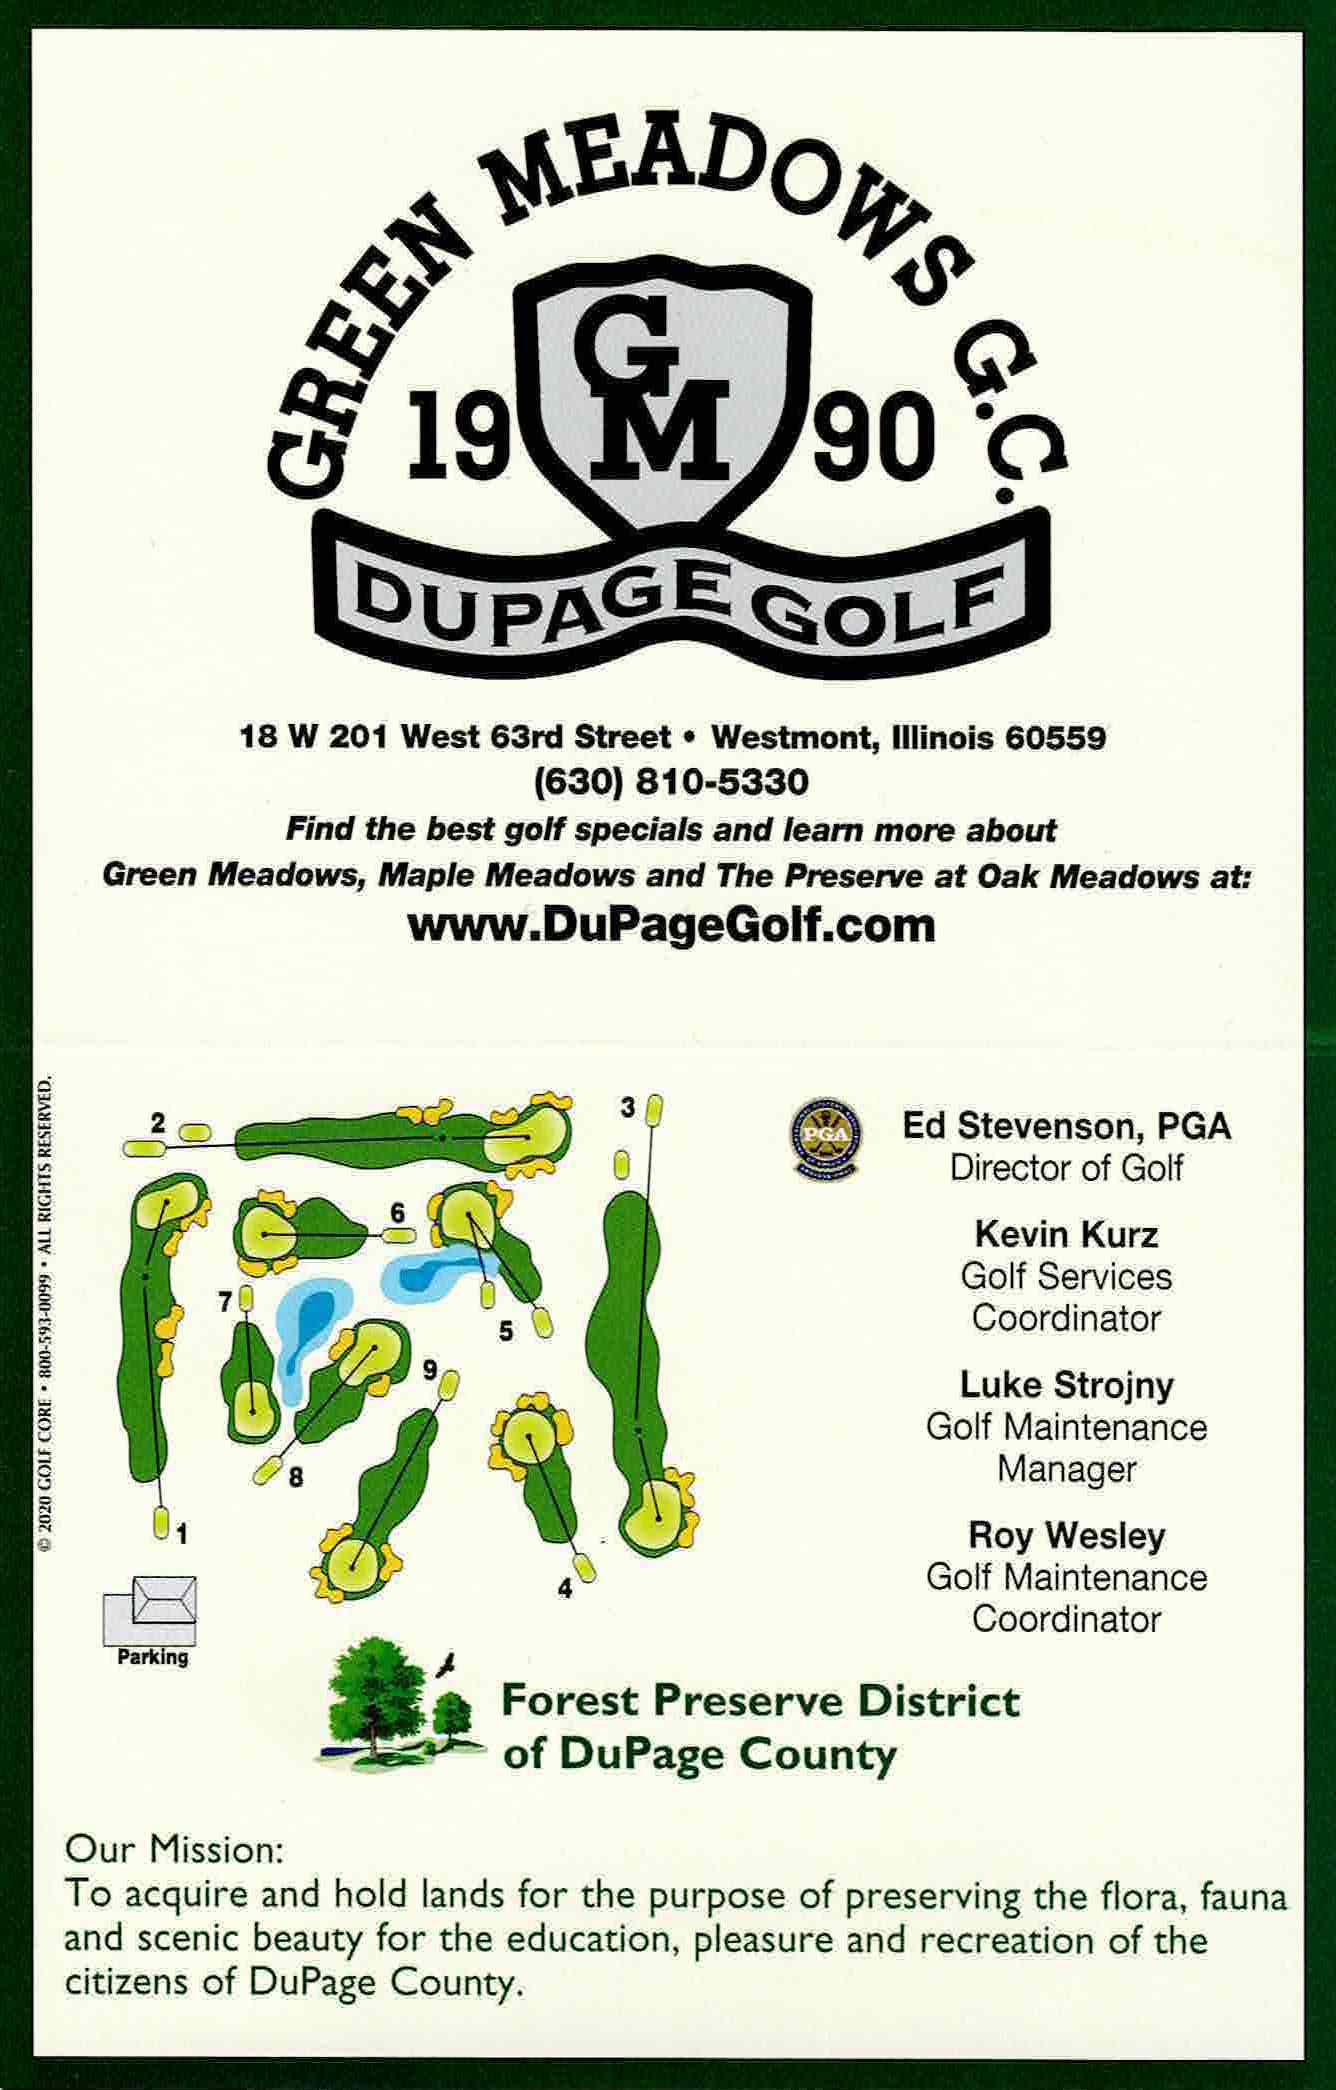 Scan of the scorecard from Green Meadows Golf Course in Westmont, Illinois. 